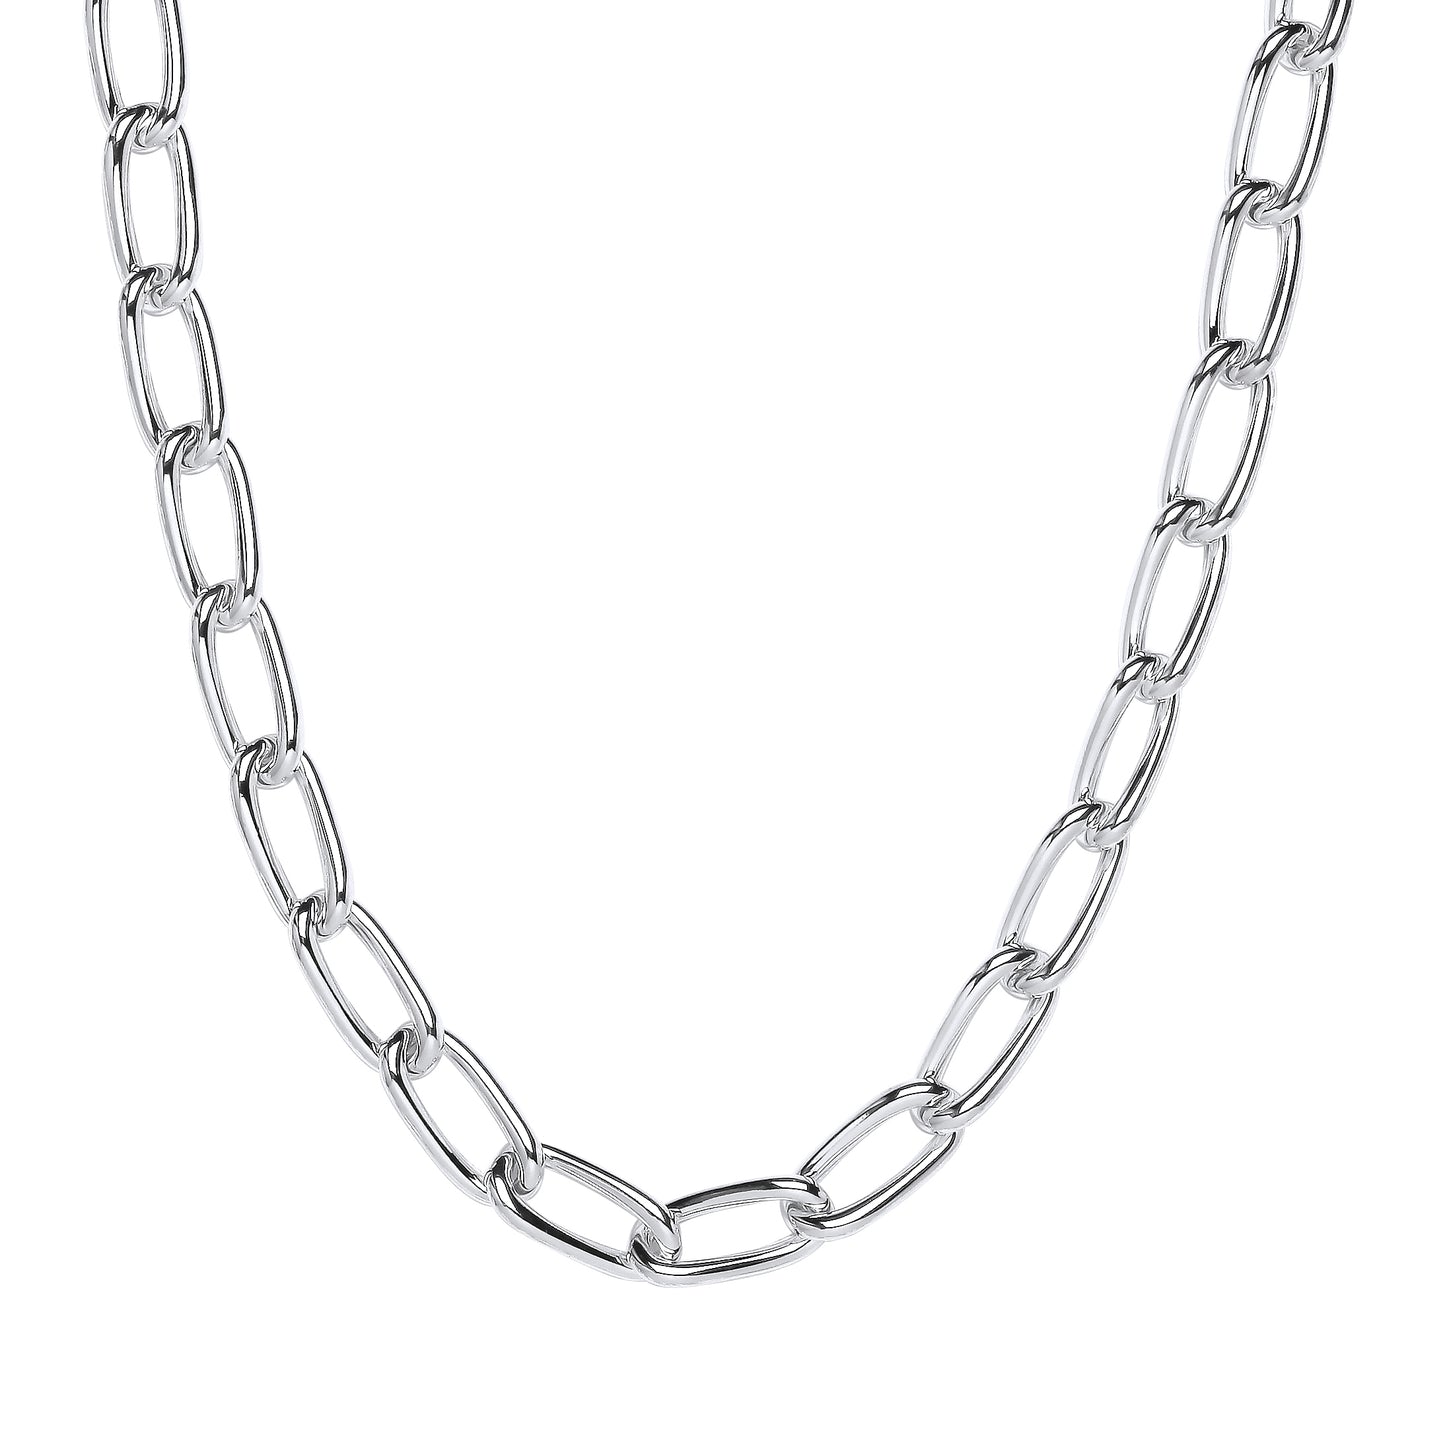 Silver  Rounded Oval Long Curb Link Chain Necklace 20 inch 50cm - GVK427